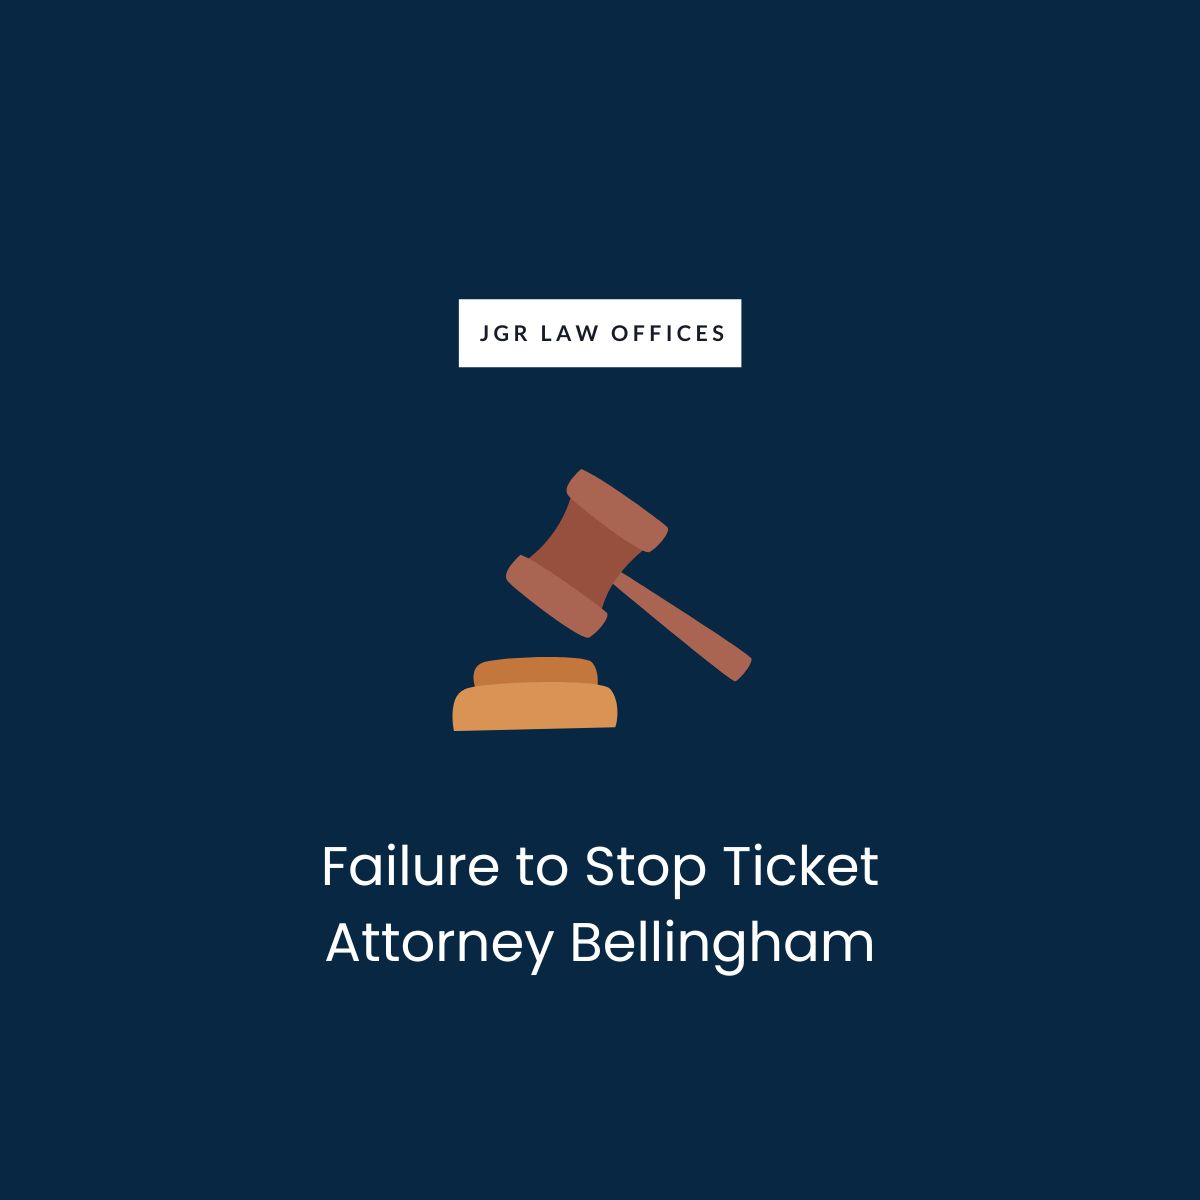 Failure to Stop Ticket Attorney Bellingham